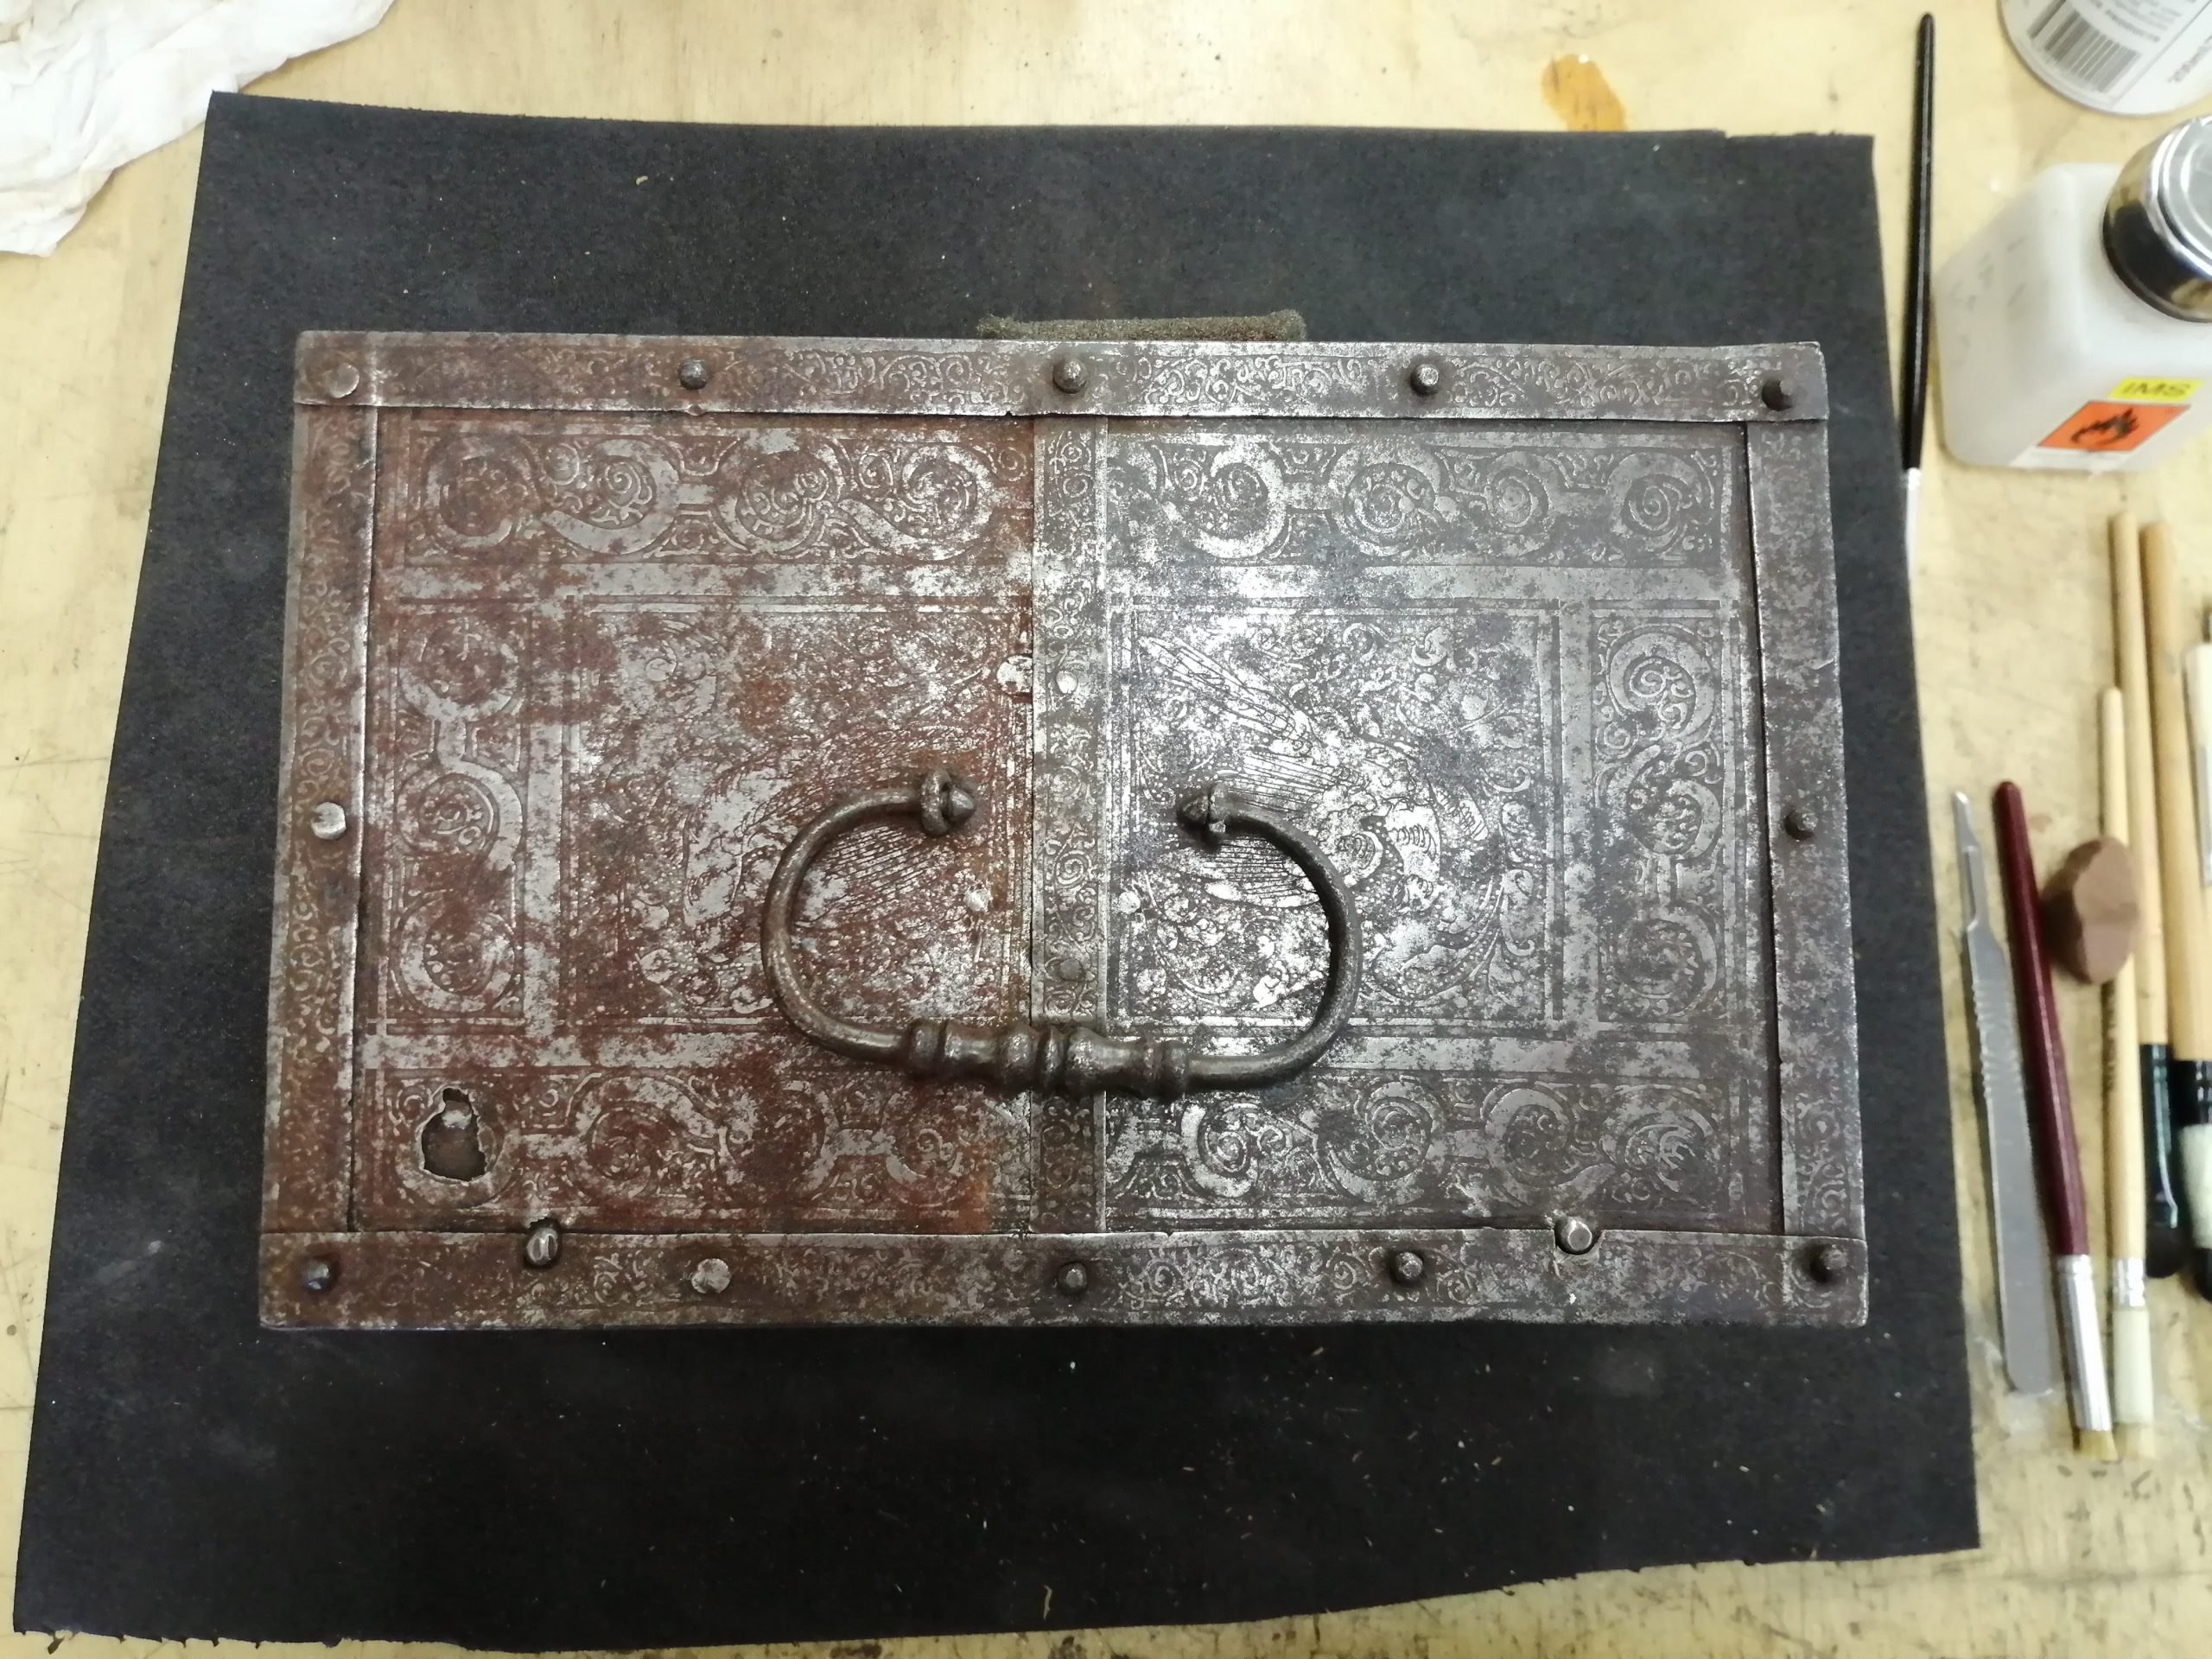 The progression of rust removal by scalpel cleaning, of a 17th C iron casket.